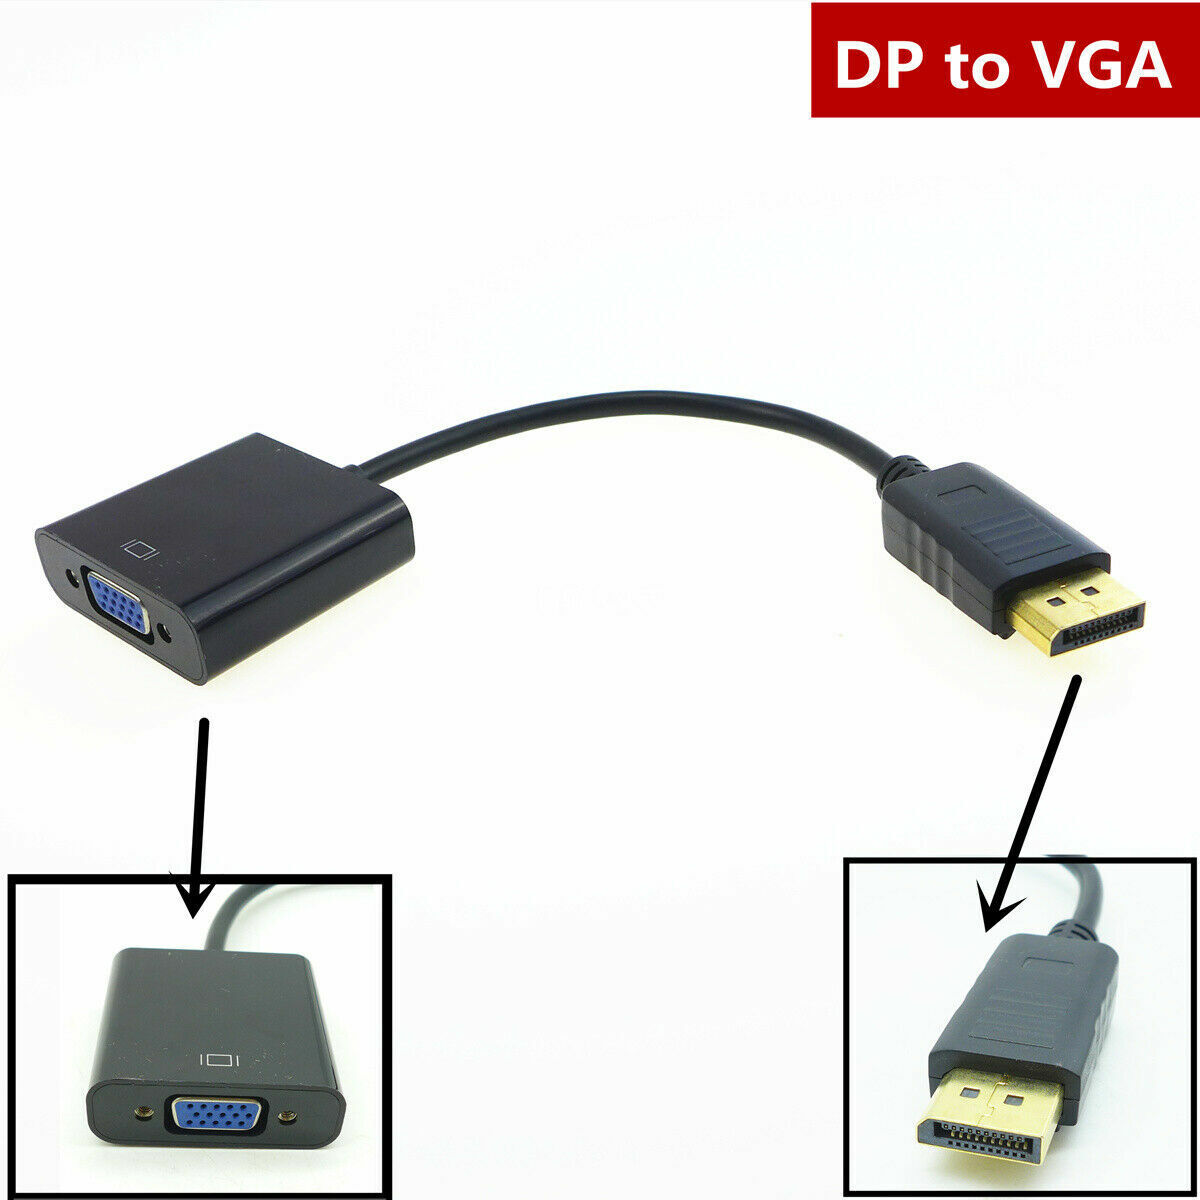 Great Choice Products 100 Xdisplay Port Dp To Vga Adapter Cable 1080P For Laptop Desktop Game Monitor